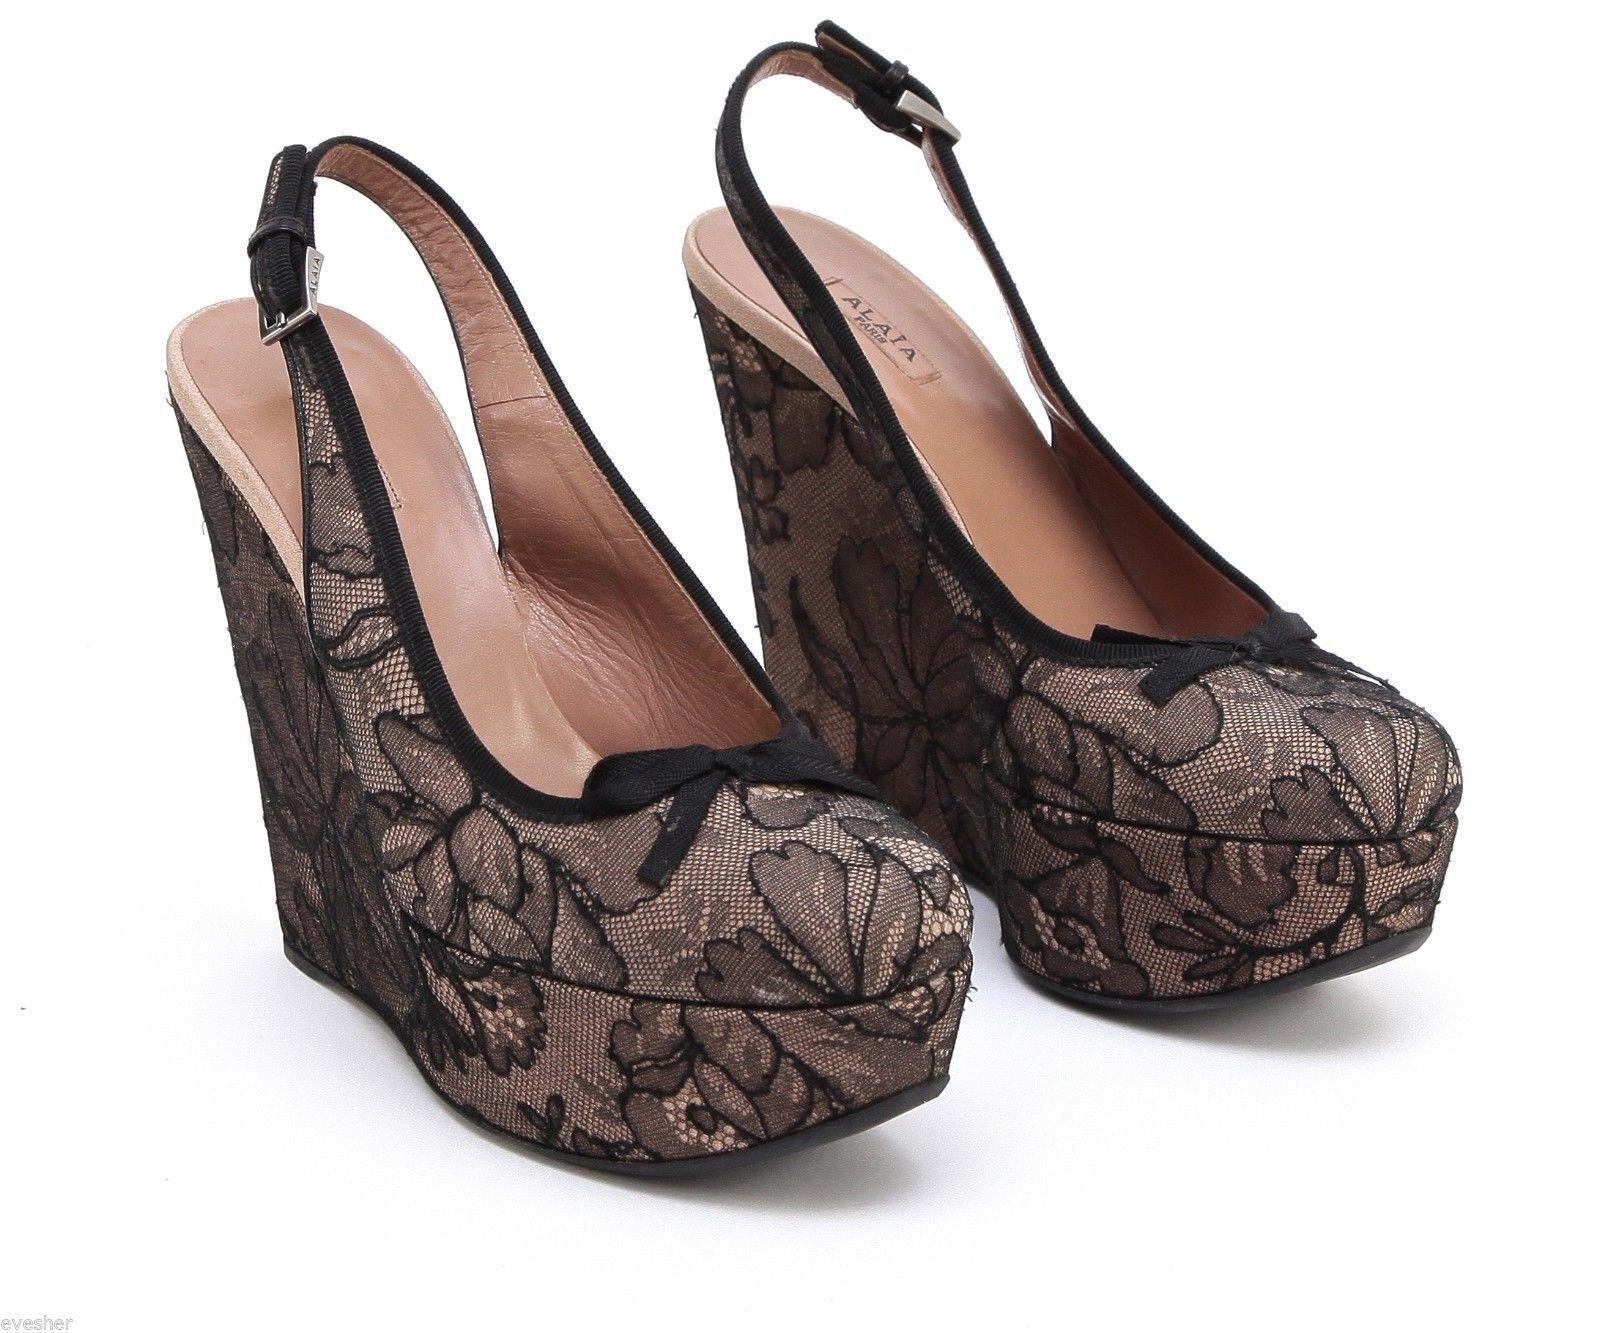 GUARANTEED AUTHENTIC GORGEOUS ALAIA PARIS LACE OVERLAY PLATFORM WEDGES

Details:
- Nude leather with black lace overlay.
- Self-covered platform.
- Rounded toe with bow on top of foot.
- Adjustable ankle strap, silver-tone signature metal buckle.
-